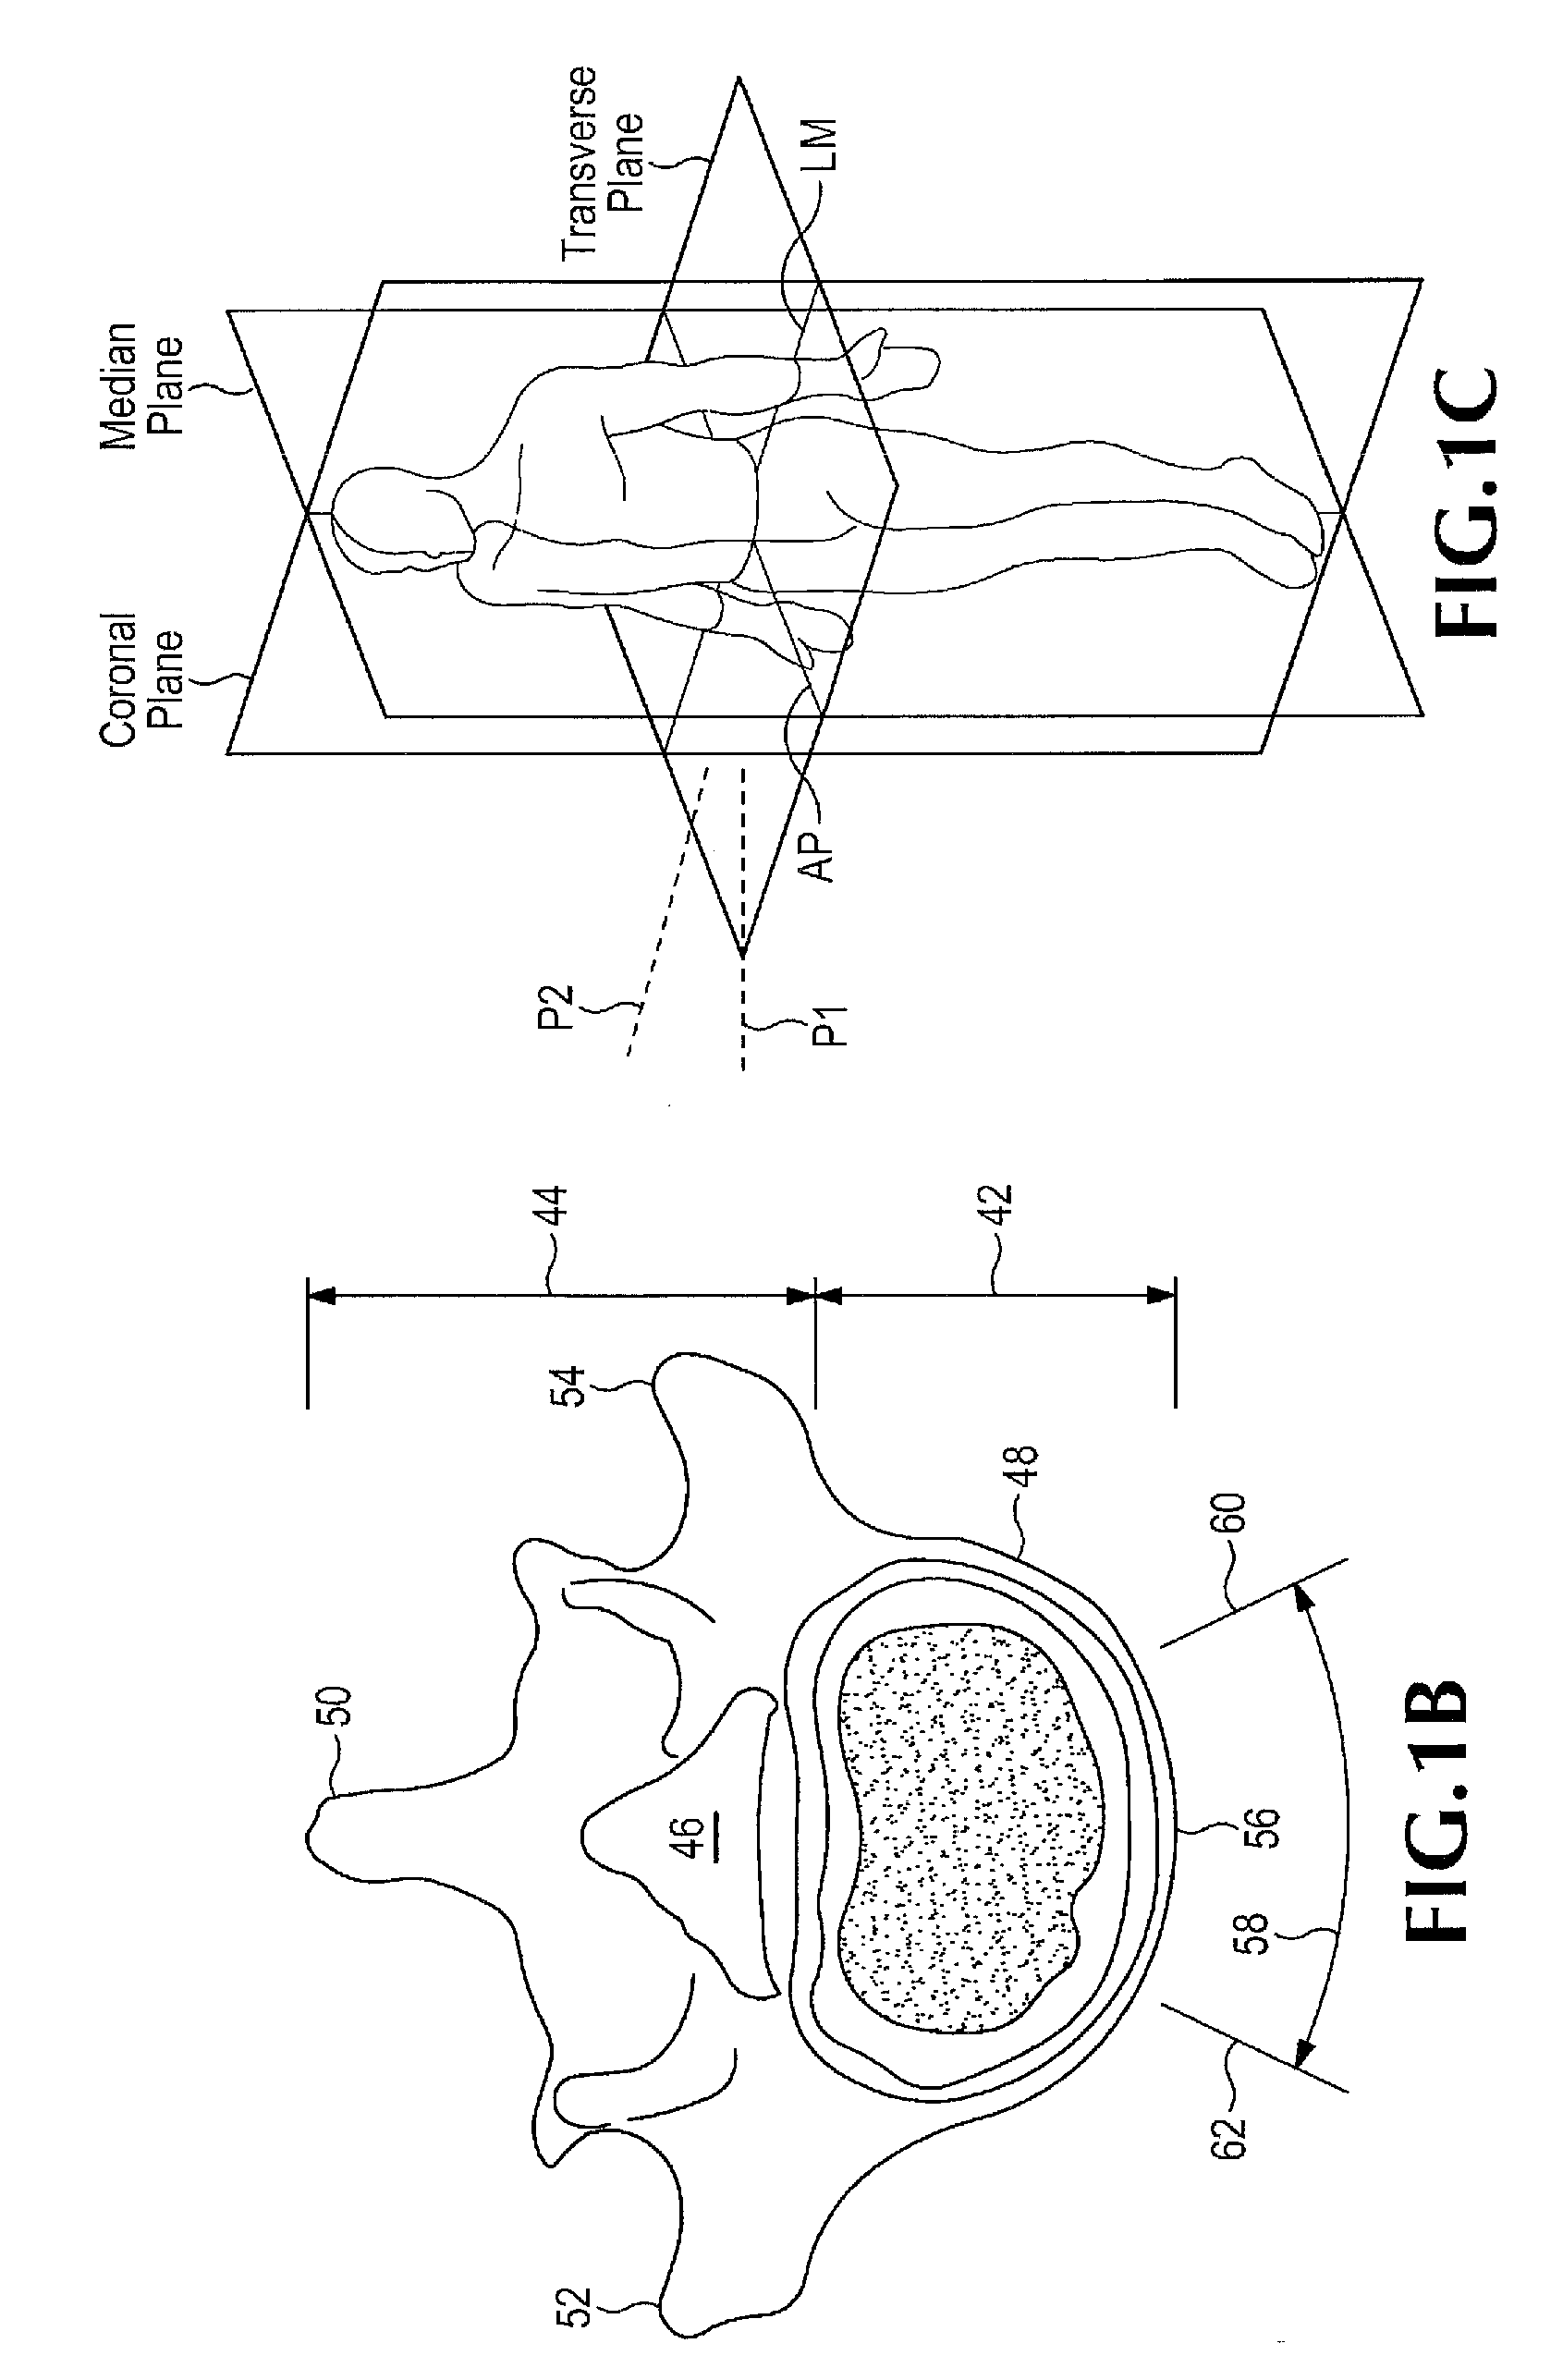 Insertion device for use during retroperitoneal lateral insertion of spinal implants